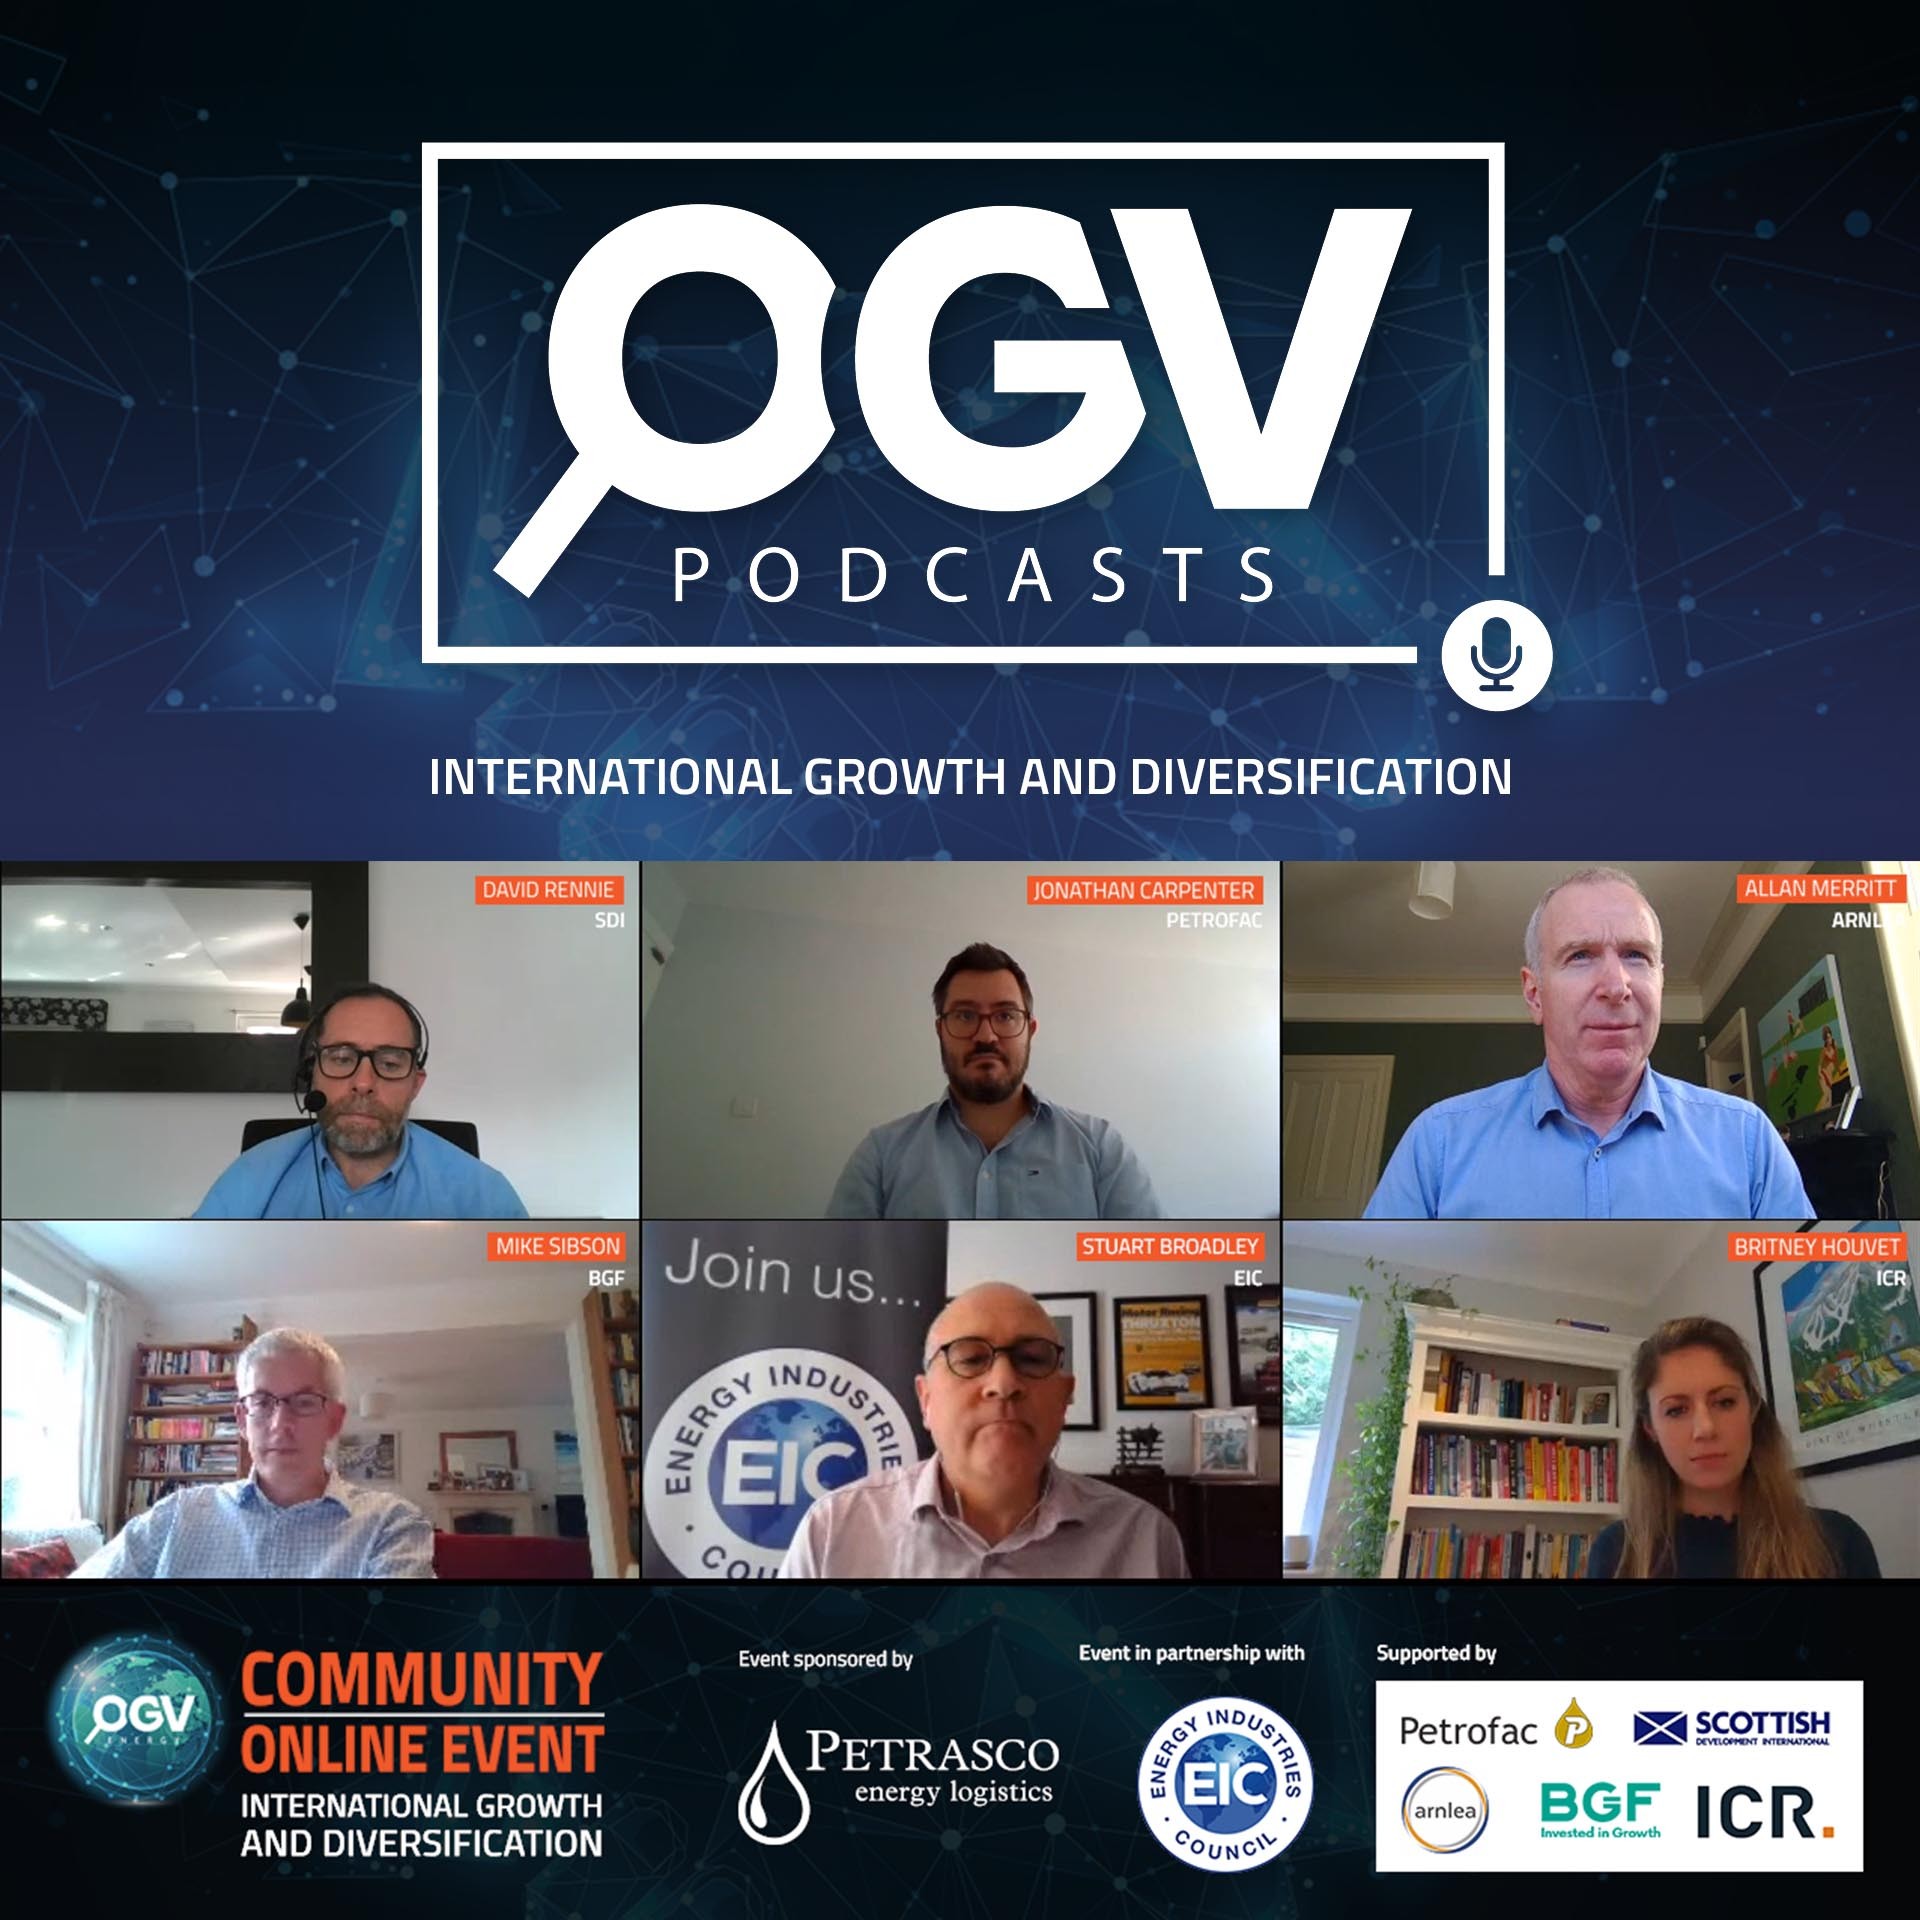 "International Growth and Diversification" - OGV Energy Community online event - Sep 2020